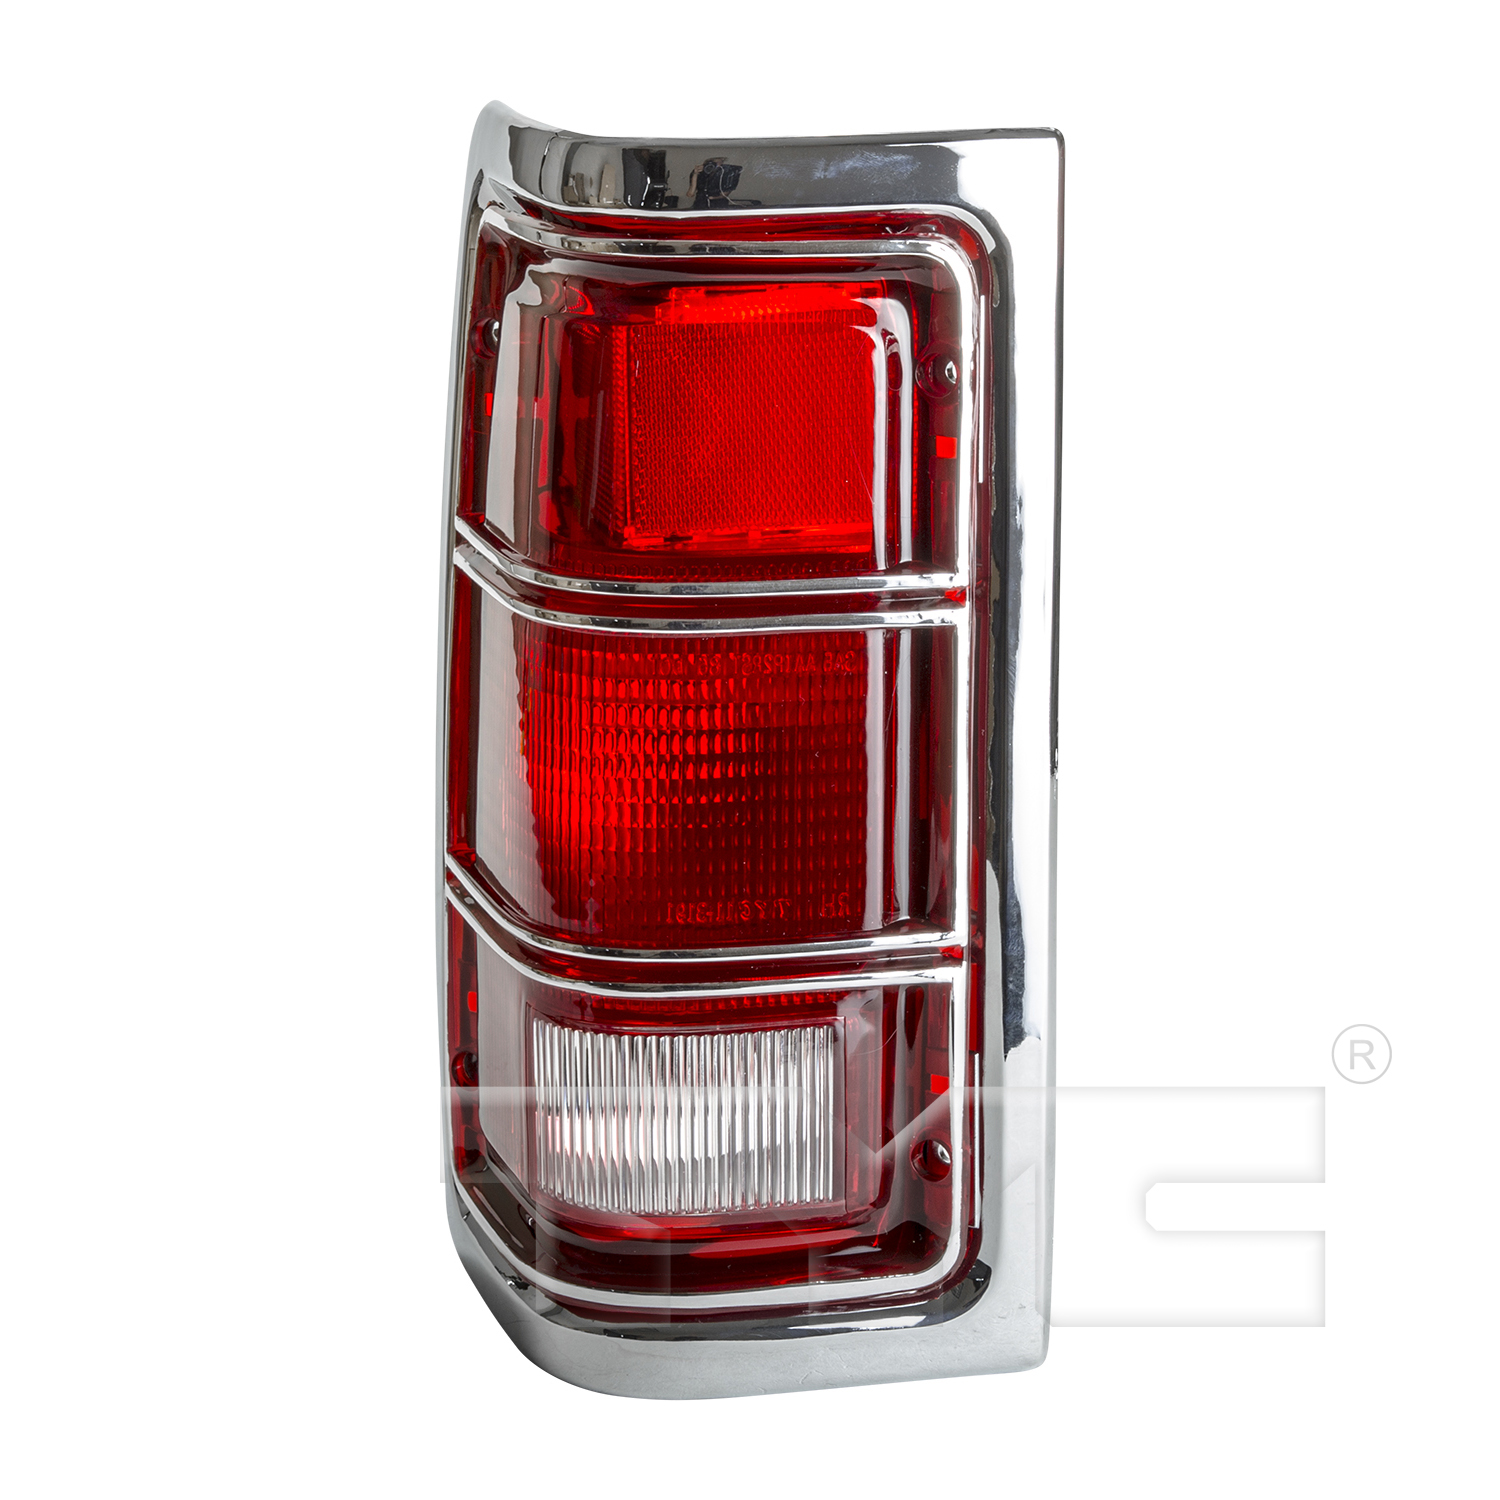 Aftermarket TAILLIGHTS for DODGE - W150, W150,81-87,LT Taillamp lens